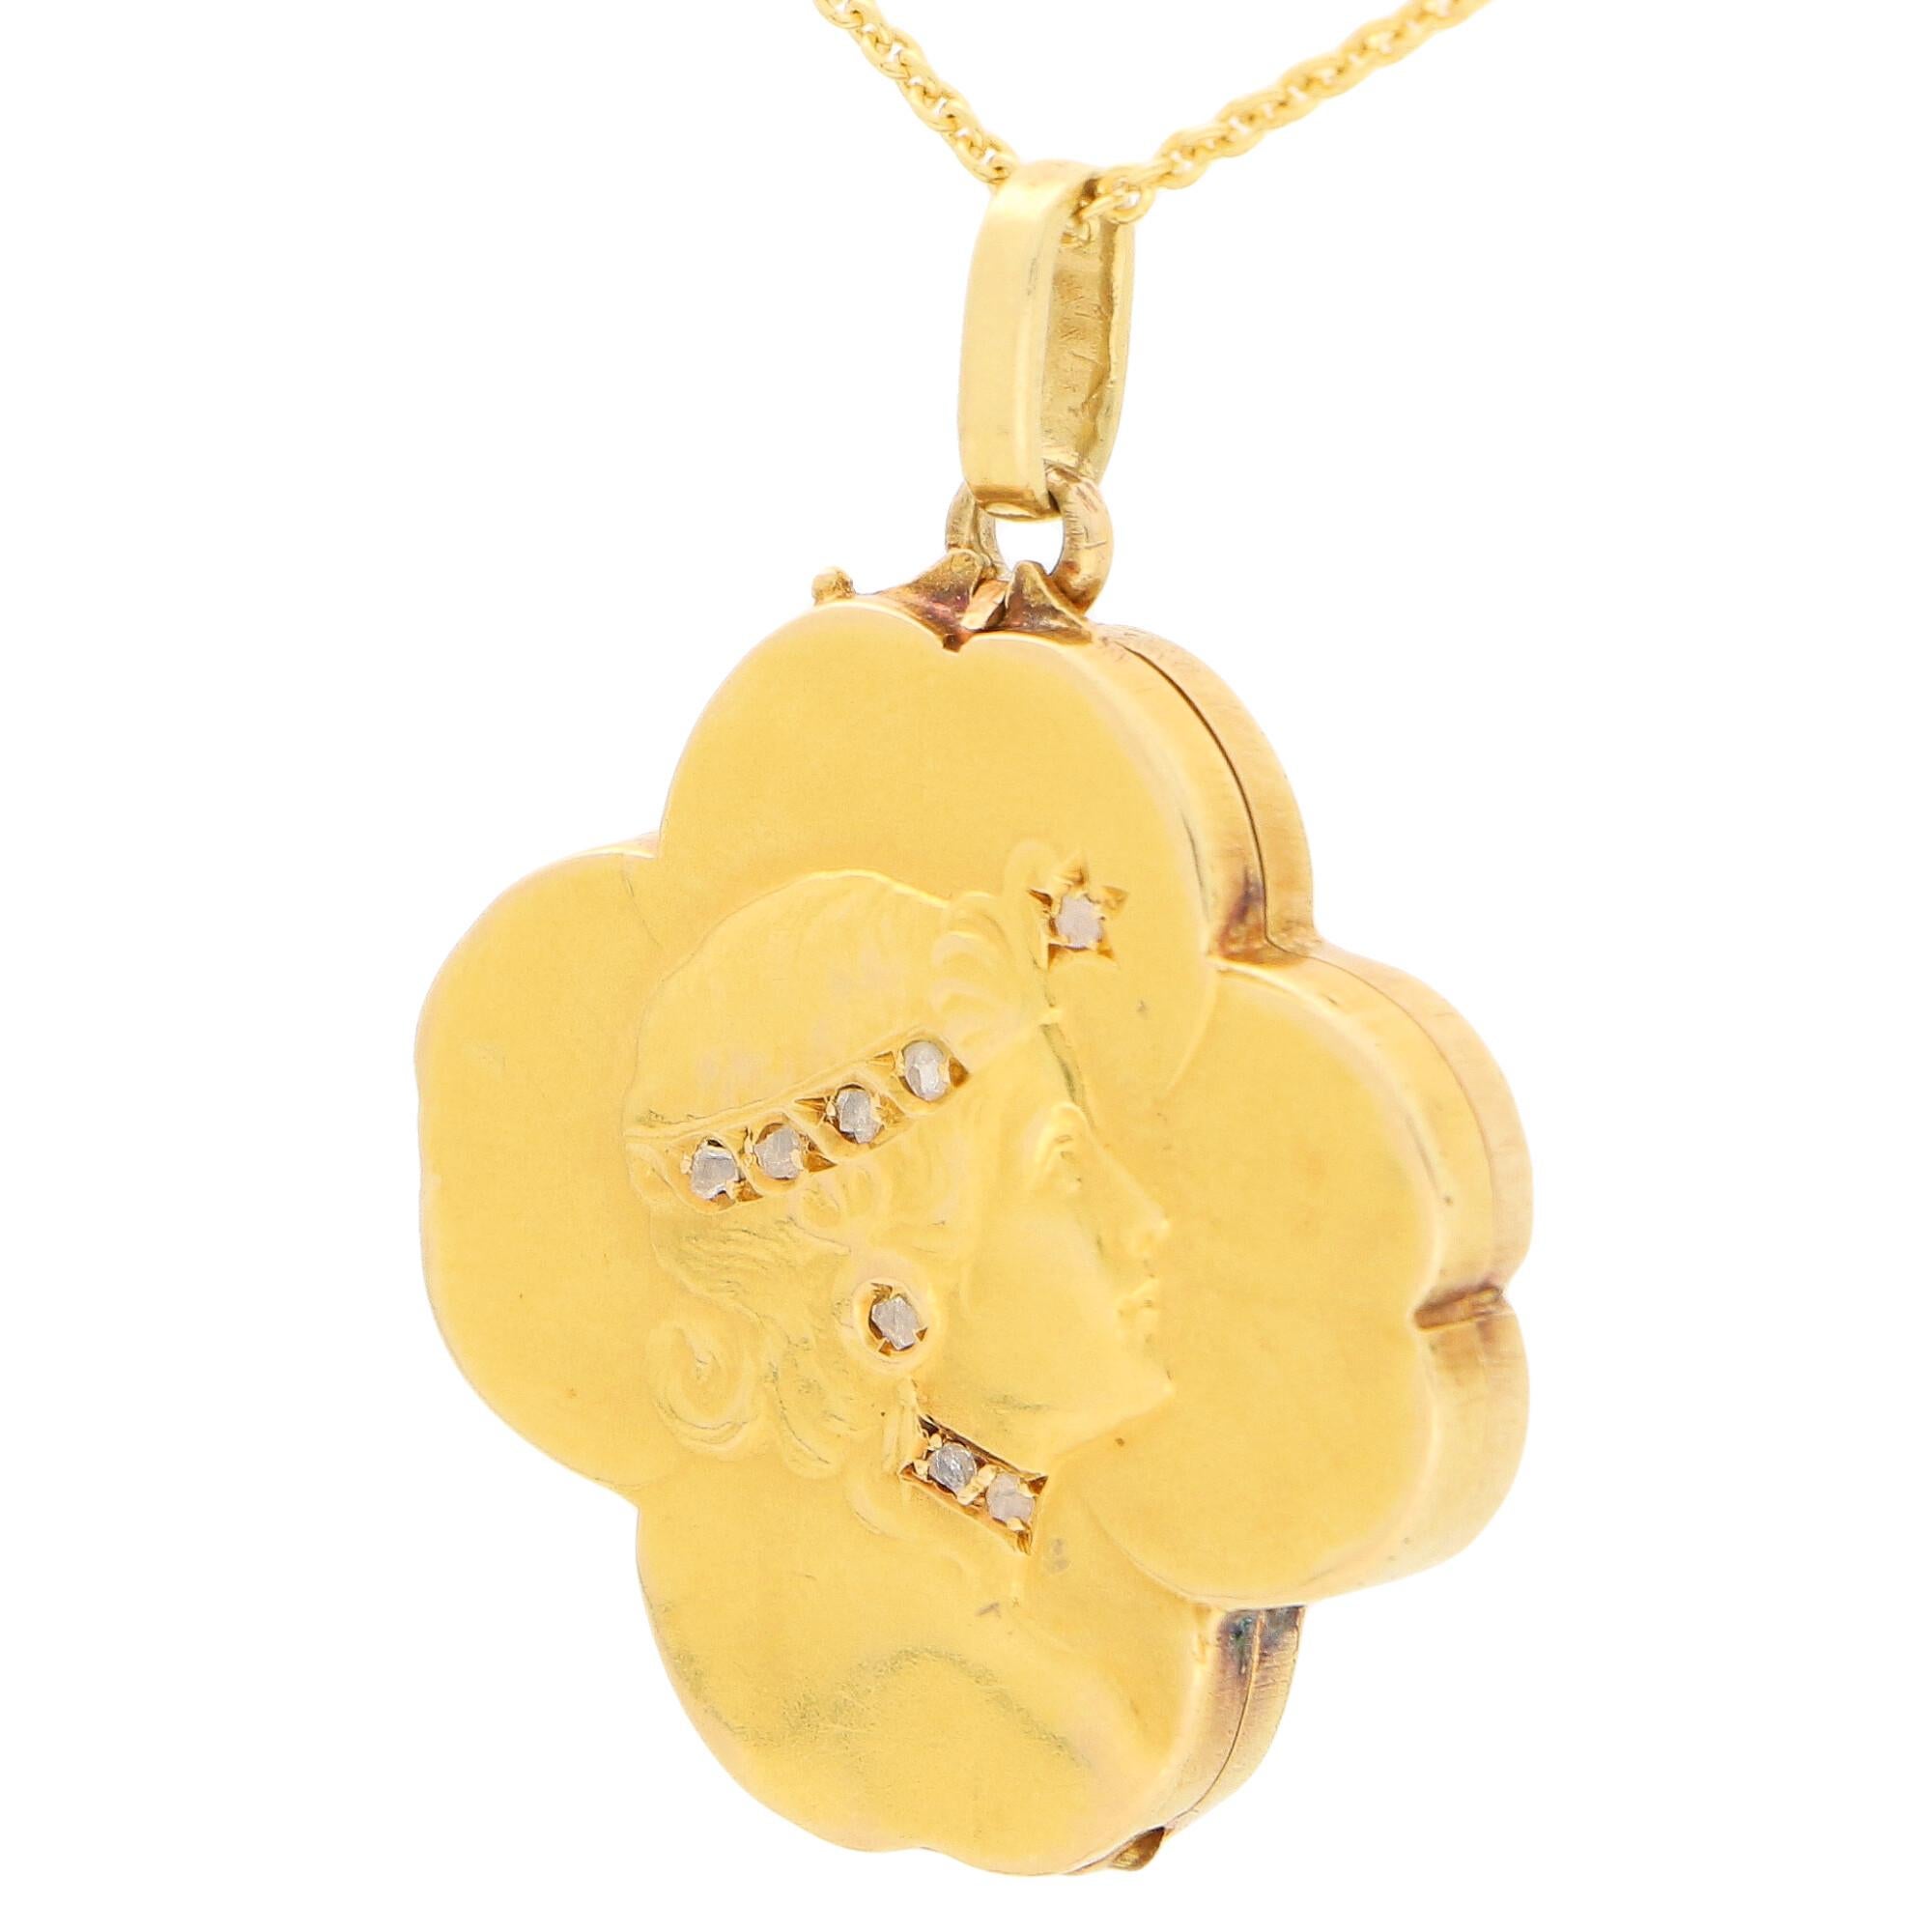 A truly beautiful Art Nouveau rose cut diamond four leaf clover locket set in 18k yellow gold.

The piece is in the form of a lucky four-leaf clover and it outlined on the lid with an elegant looking woman. The woman's headpiece, earrings and choker